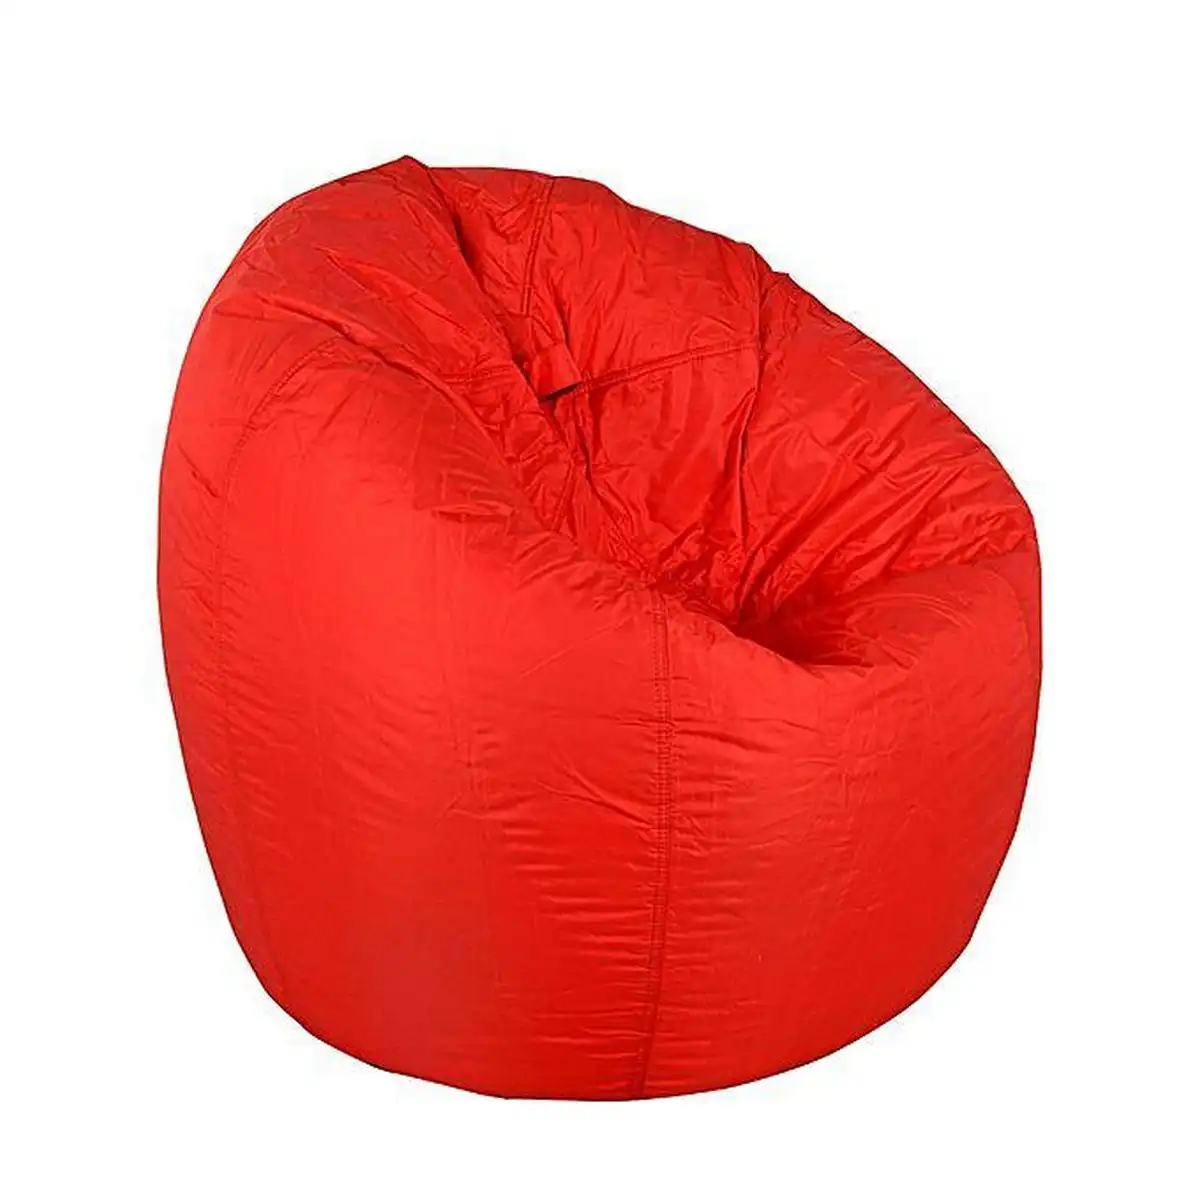 daraz-pk-toys-with-prices-daraz-product-bean-bag-comfotable-to-sit-on